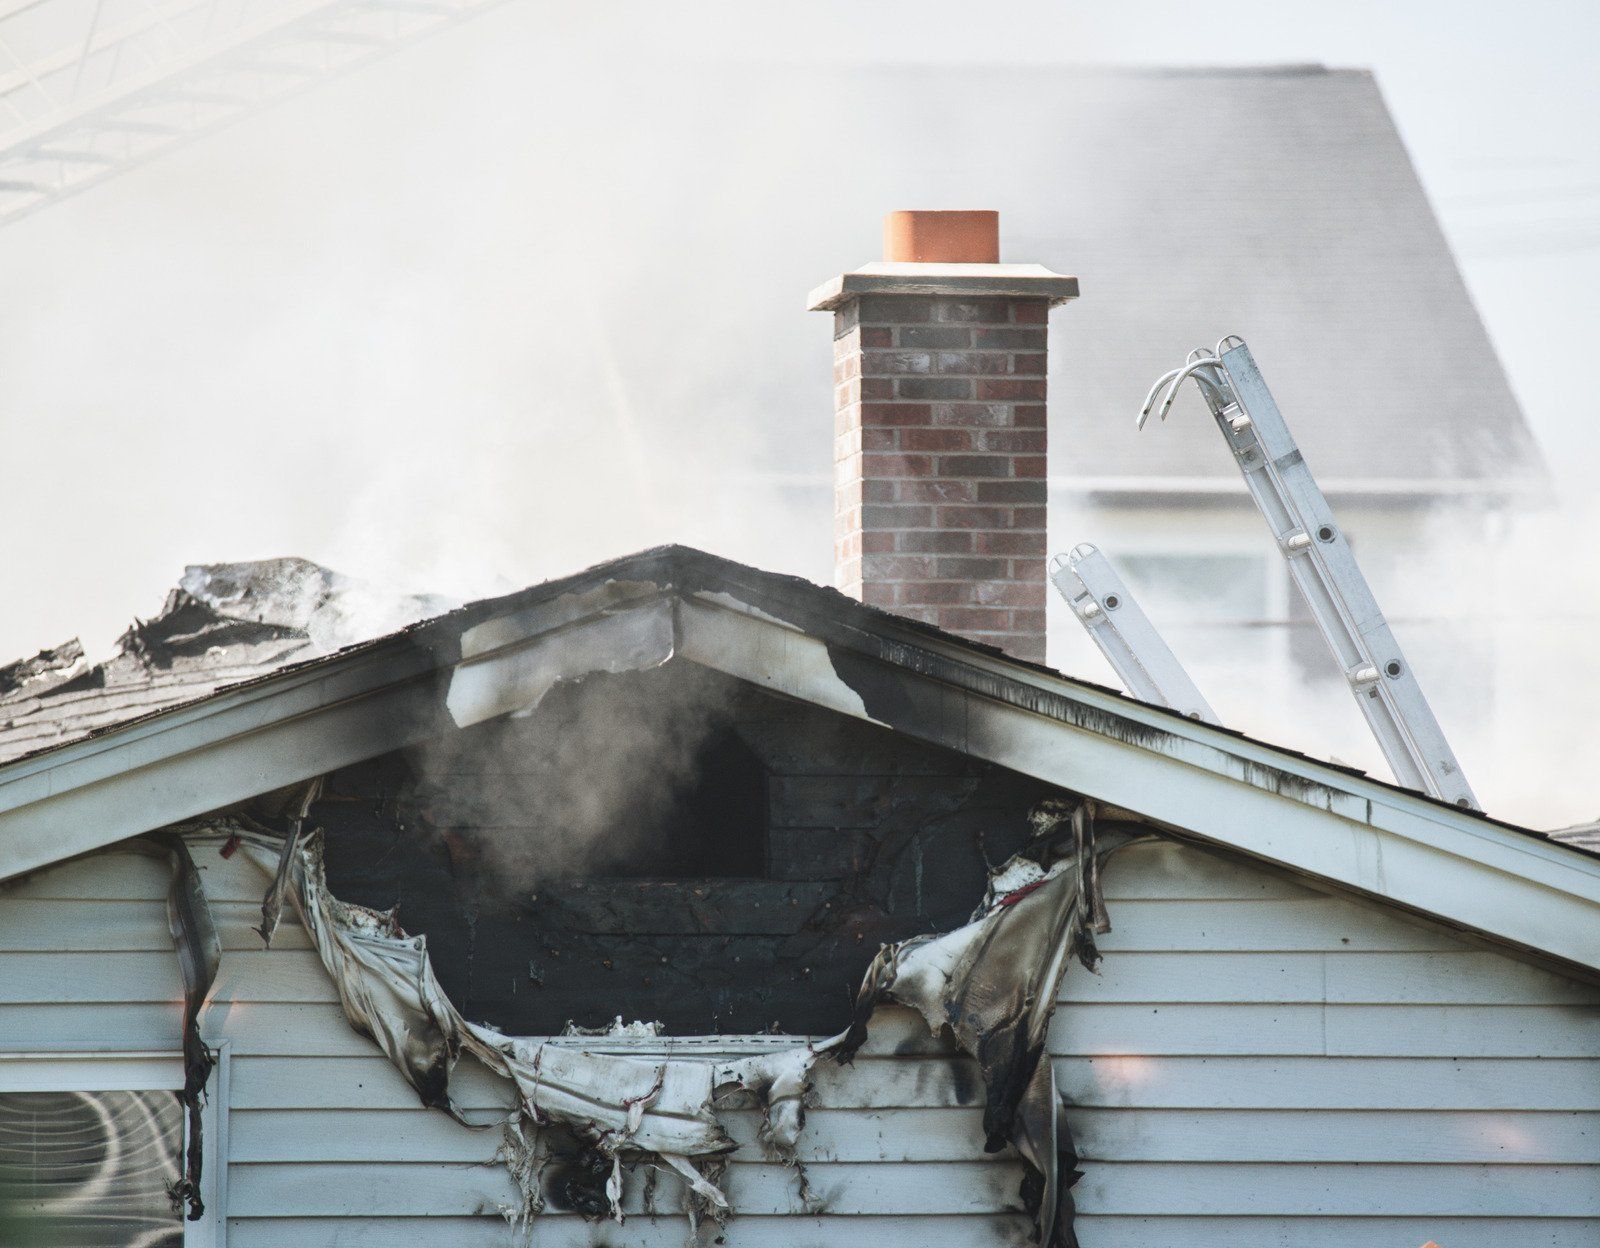 A house that has been damaged by a fire with smoke coming out of the chimney.